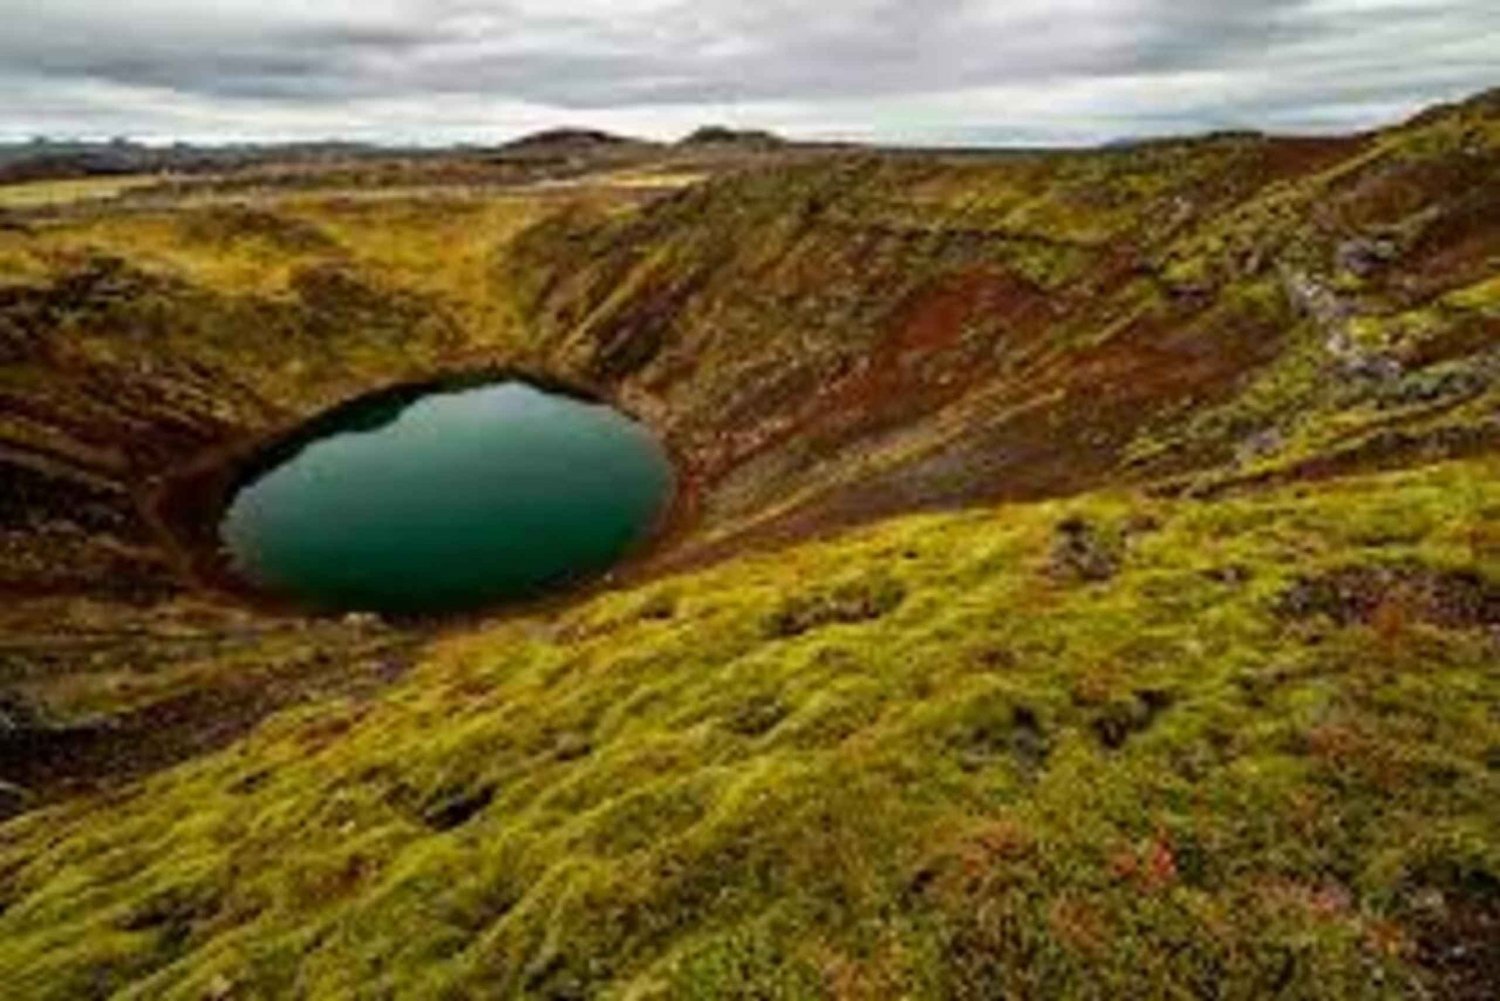 Self-guided tours of Iceland's Golden Circle with audioguide